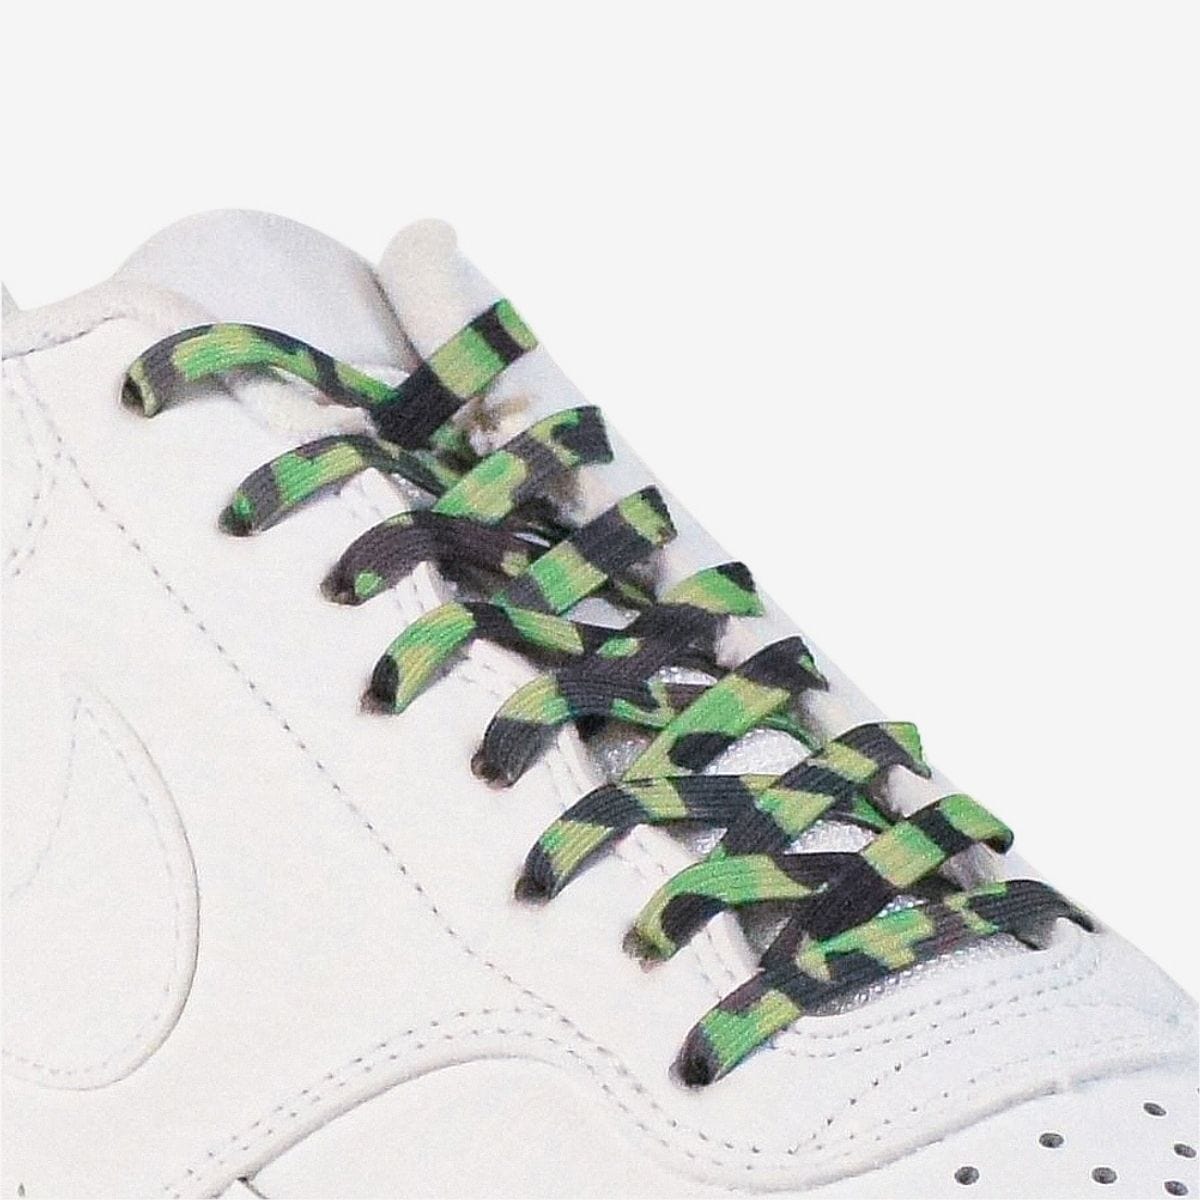 different-ways-to-lace-shoes-with-green-camo-elastic-shoelaces-on-white-kicks